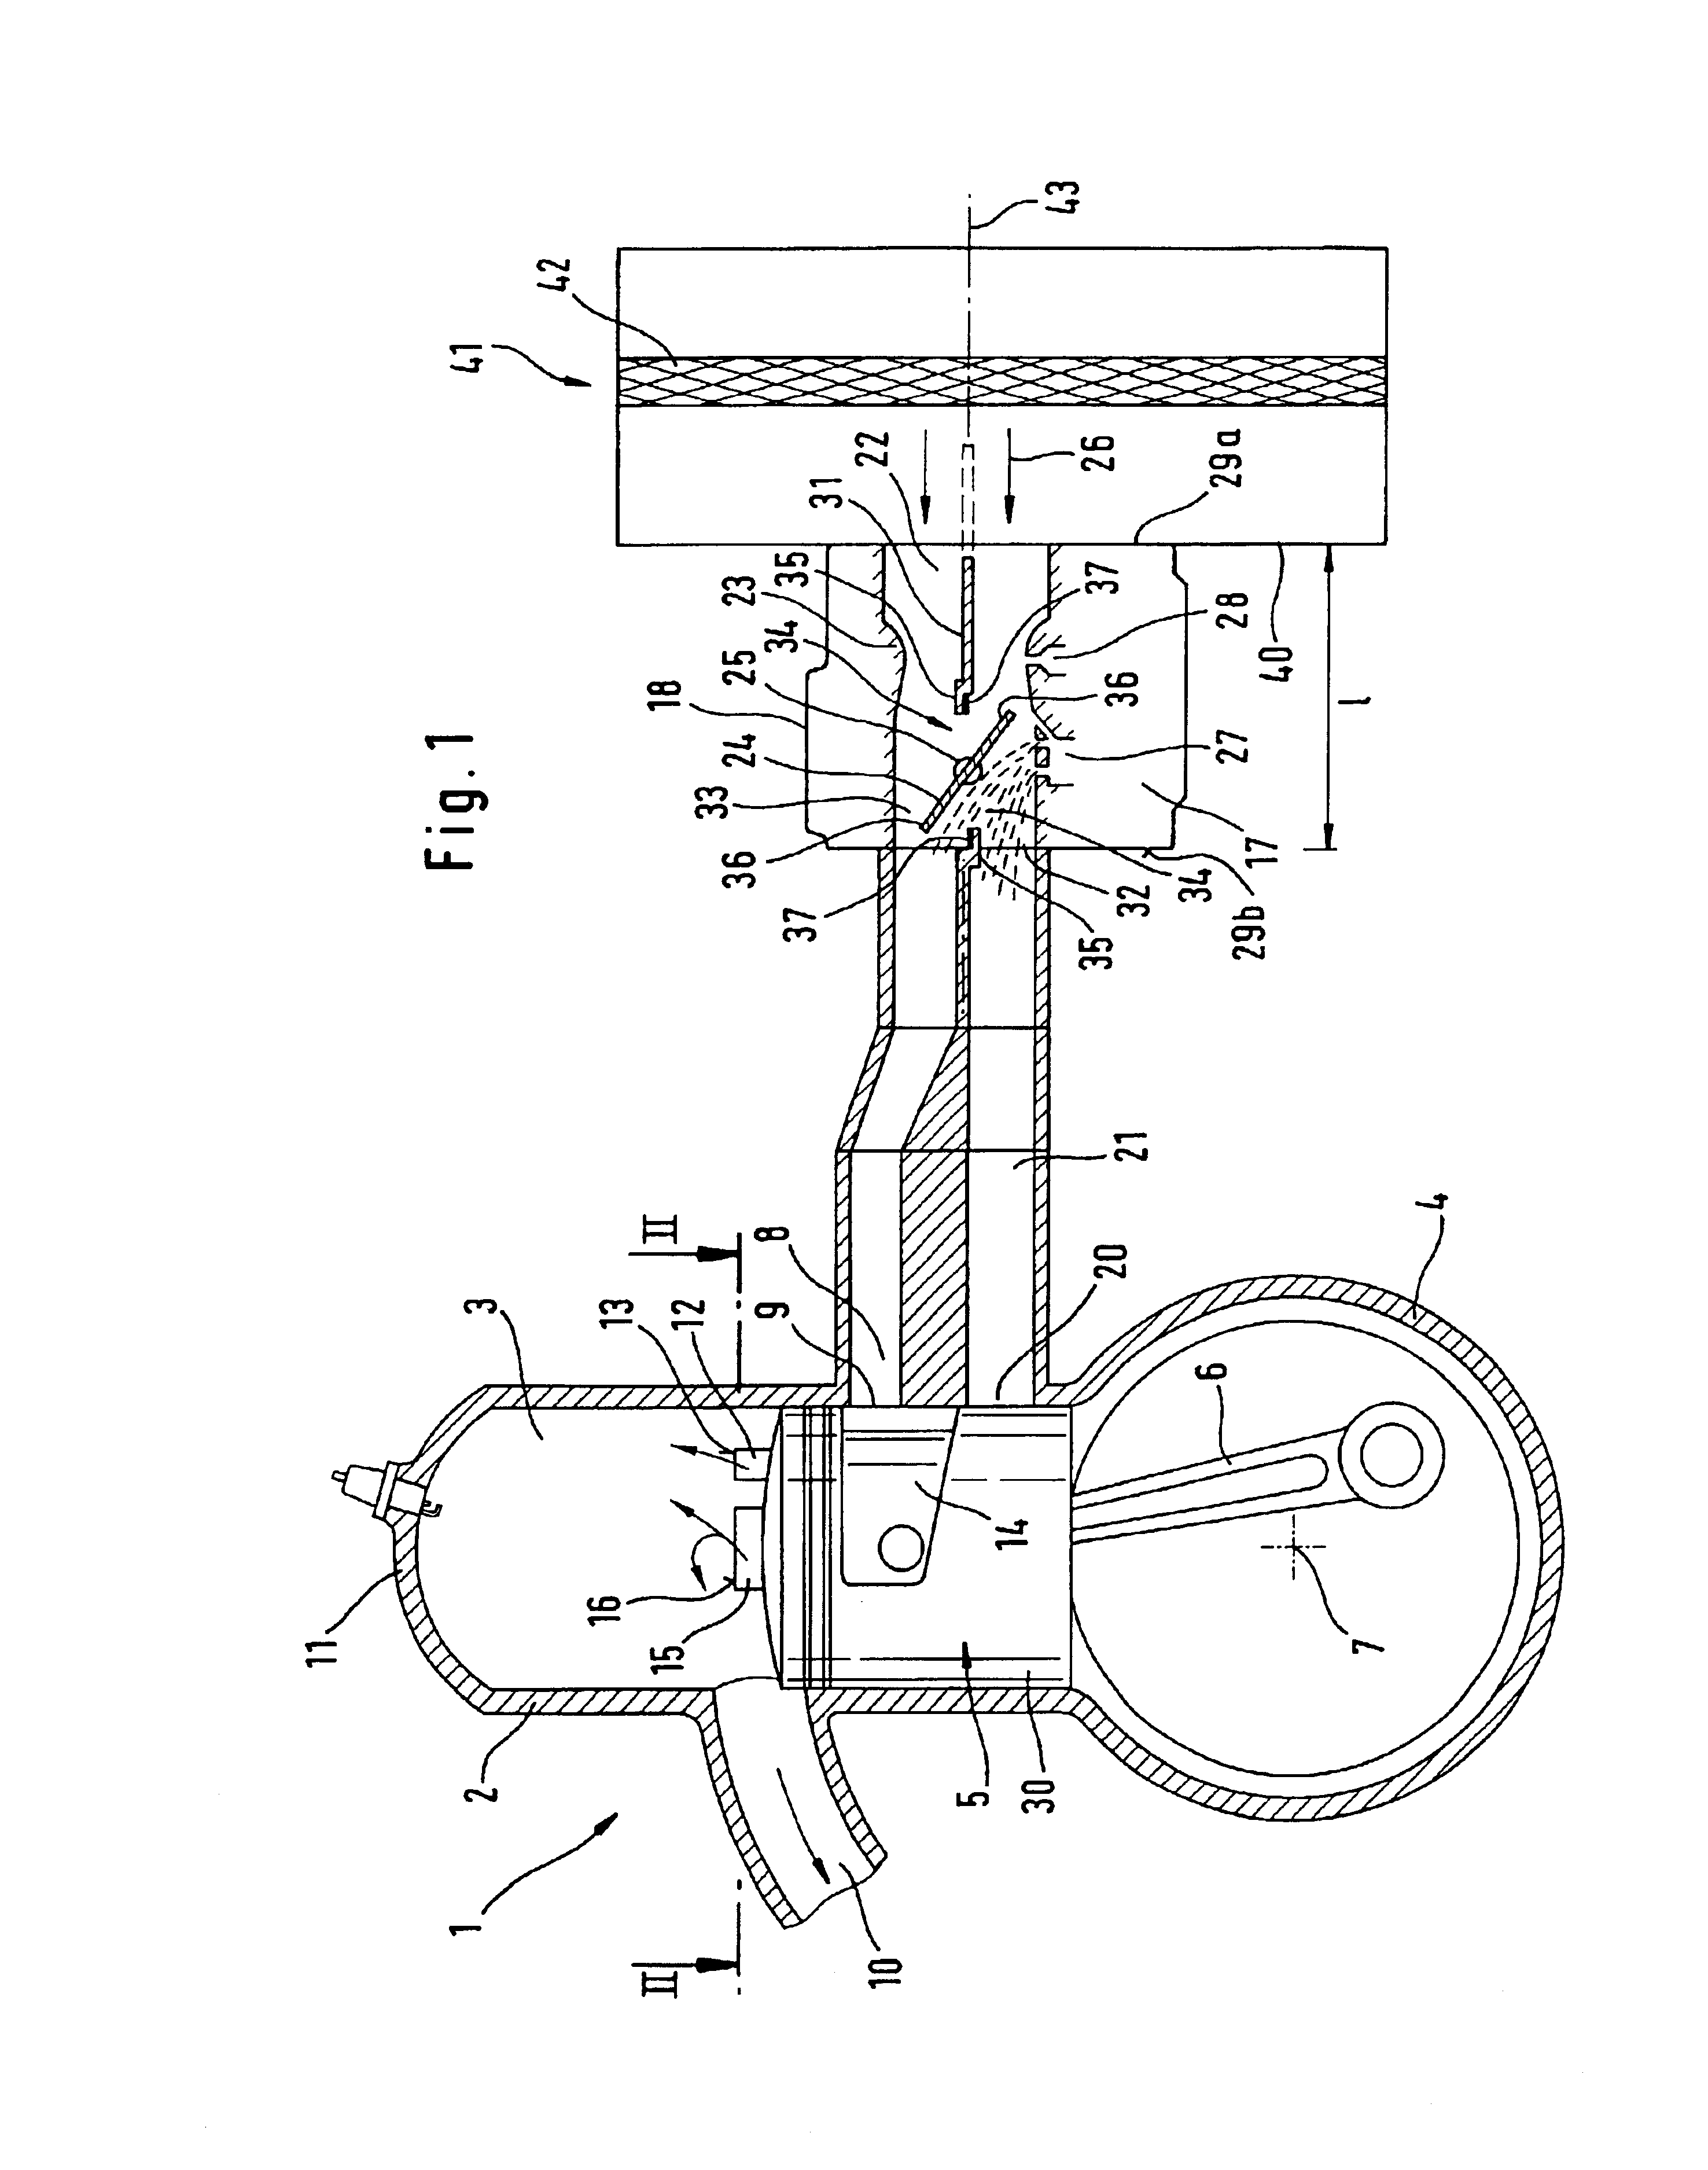 Two-cycle engine with forward scavenging air positioning and single-flow carburetor